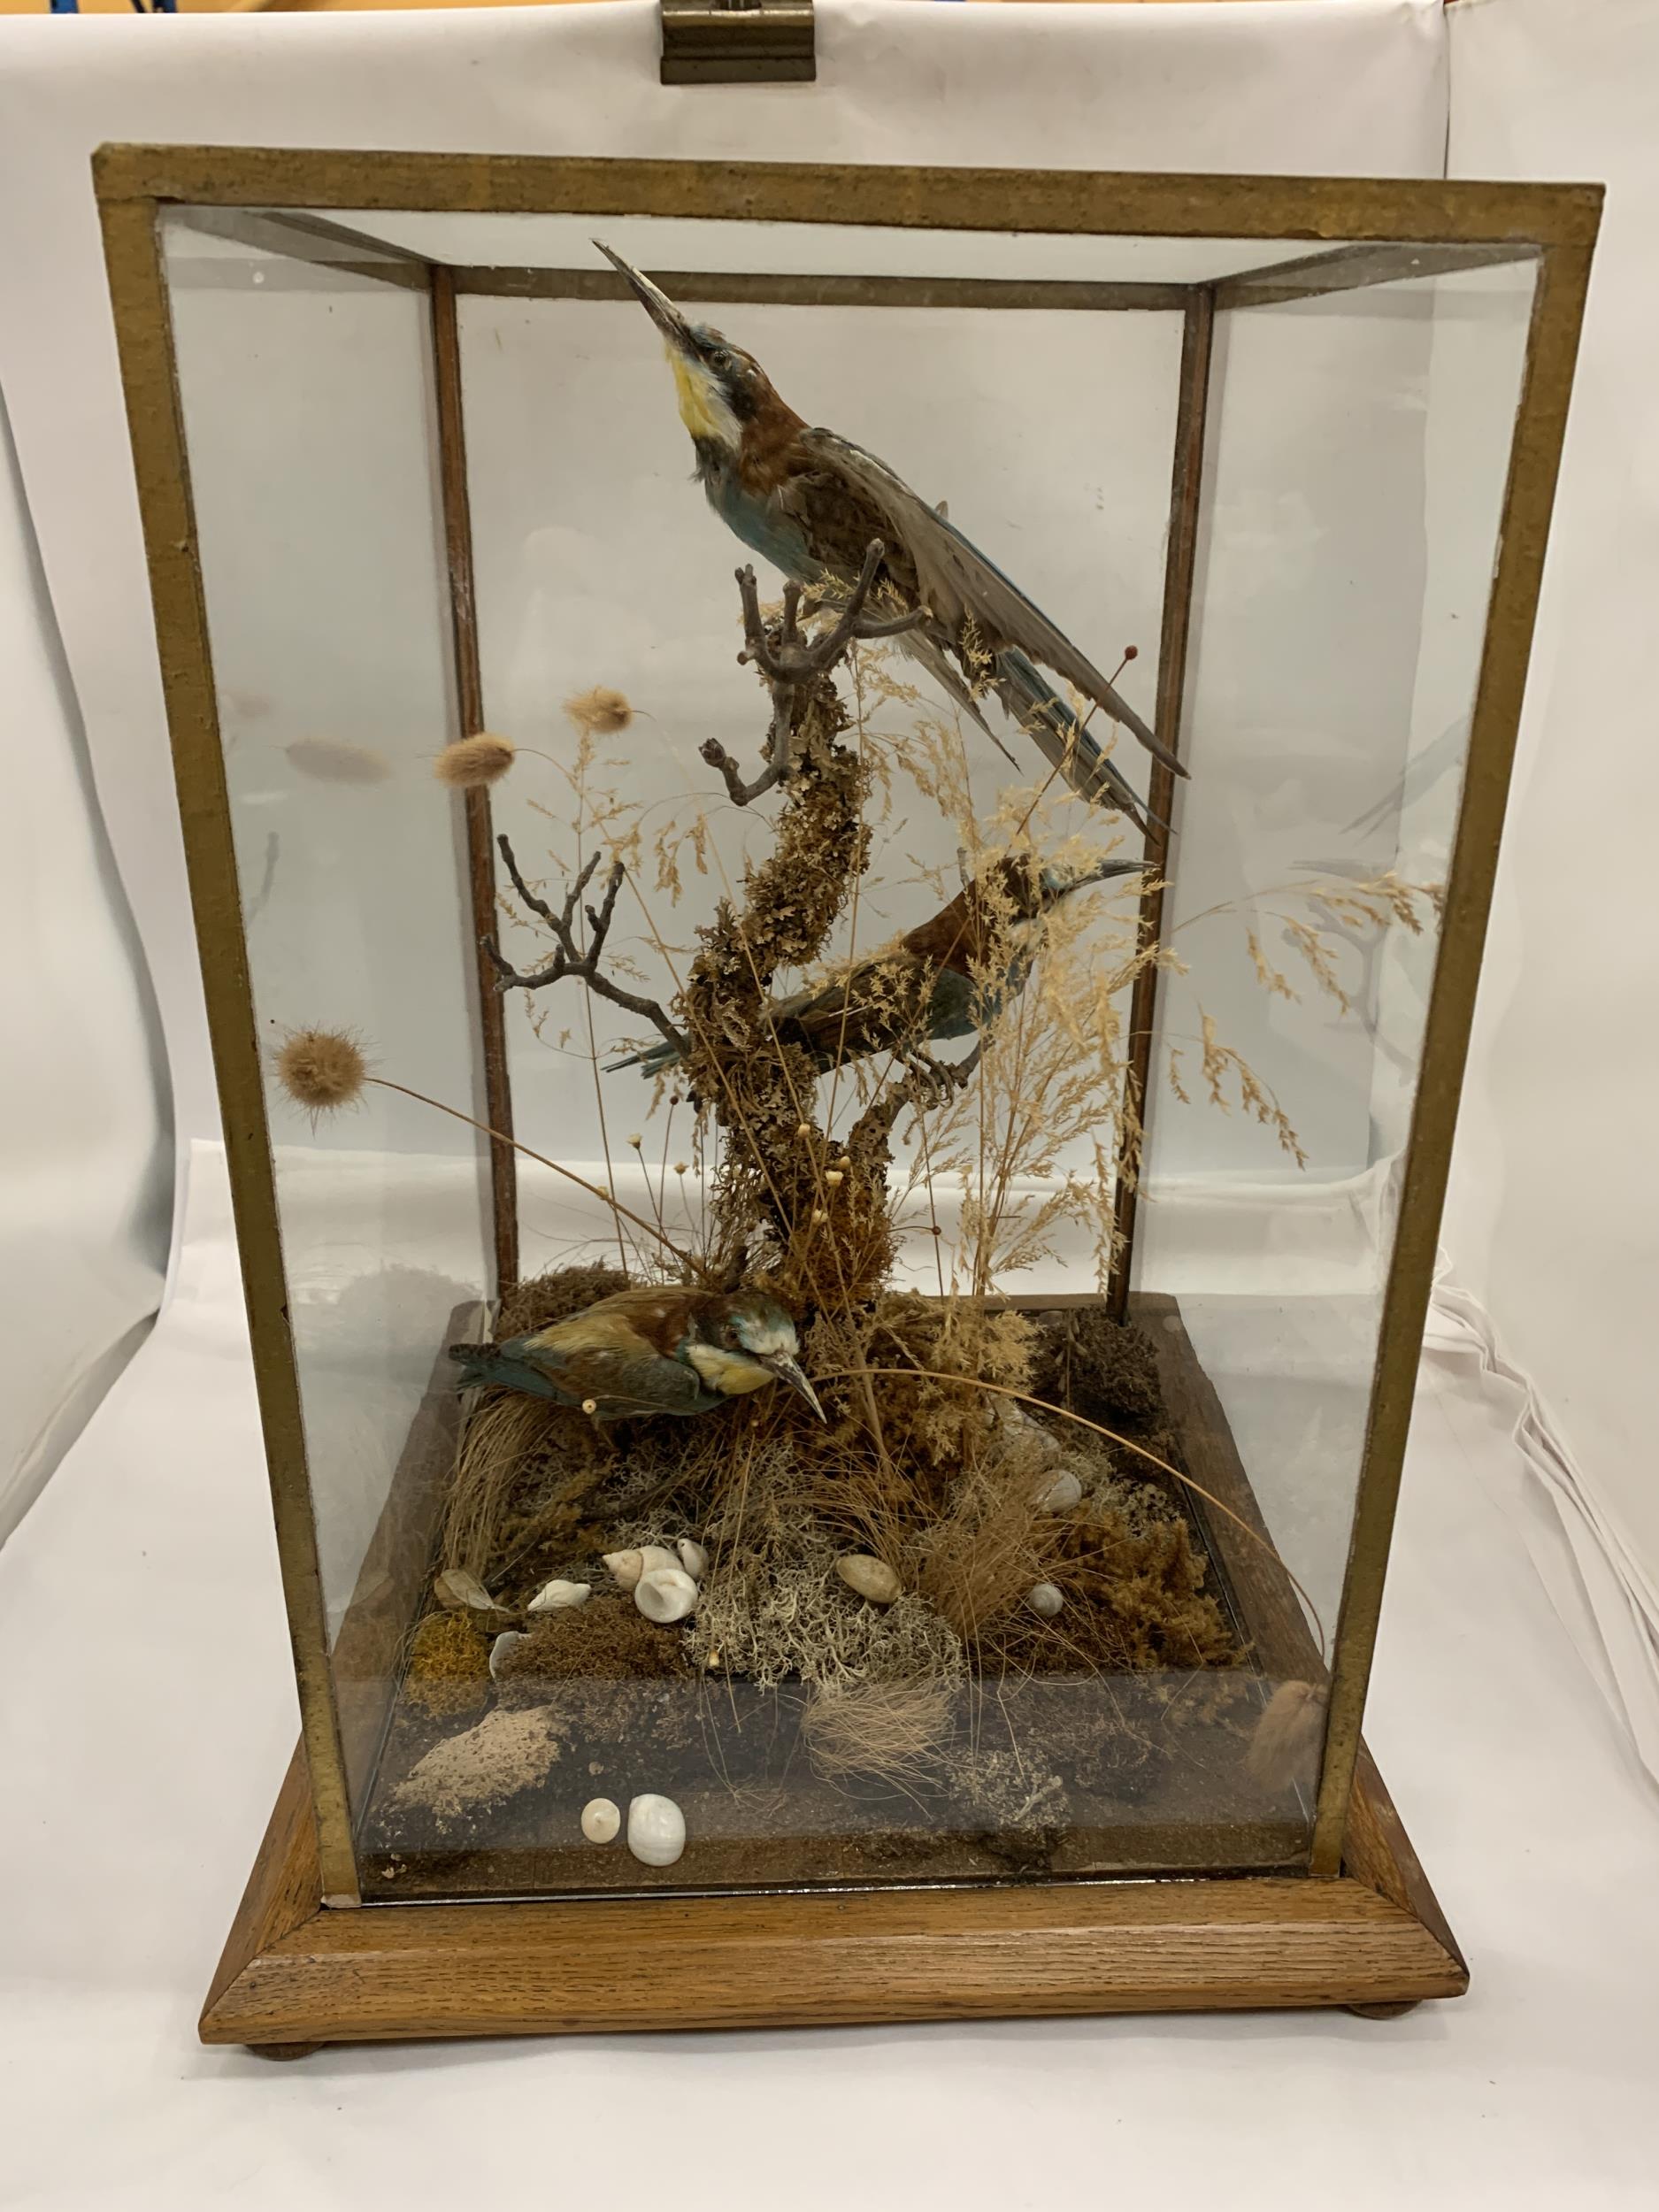 A VINTAGE TAXIDERMY MODEL OF TWO BIRDS IN GLASS DISPLAY CASE WITH OAK BASE